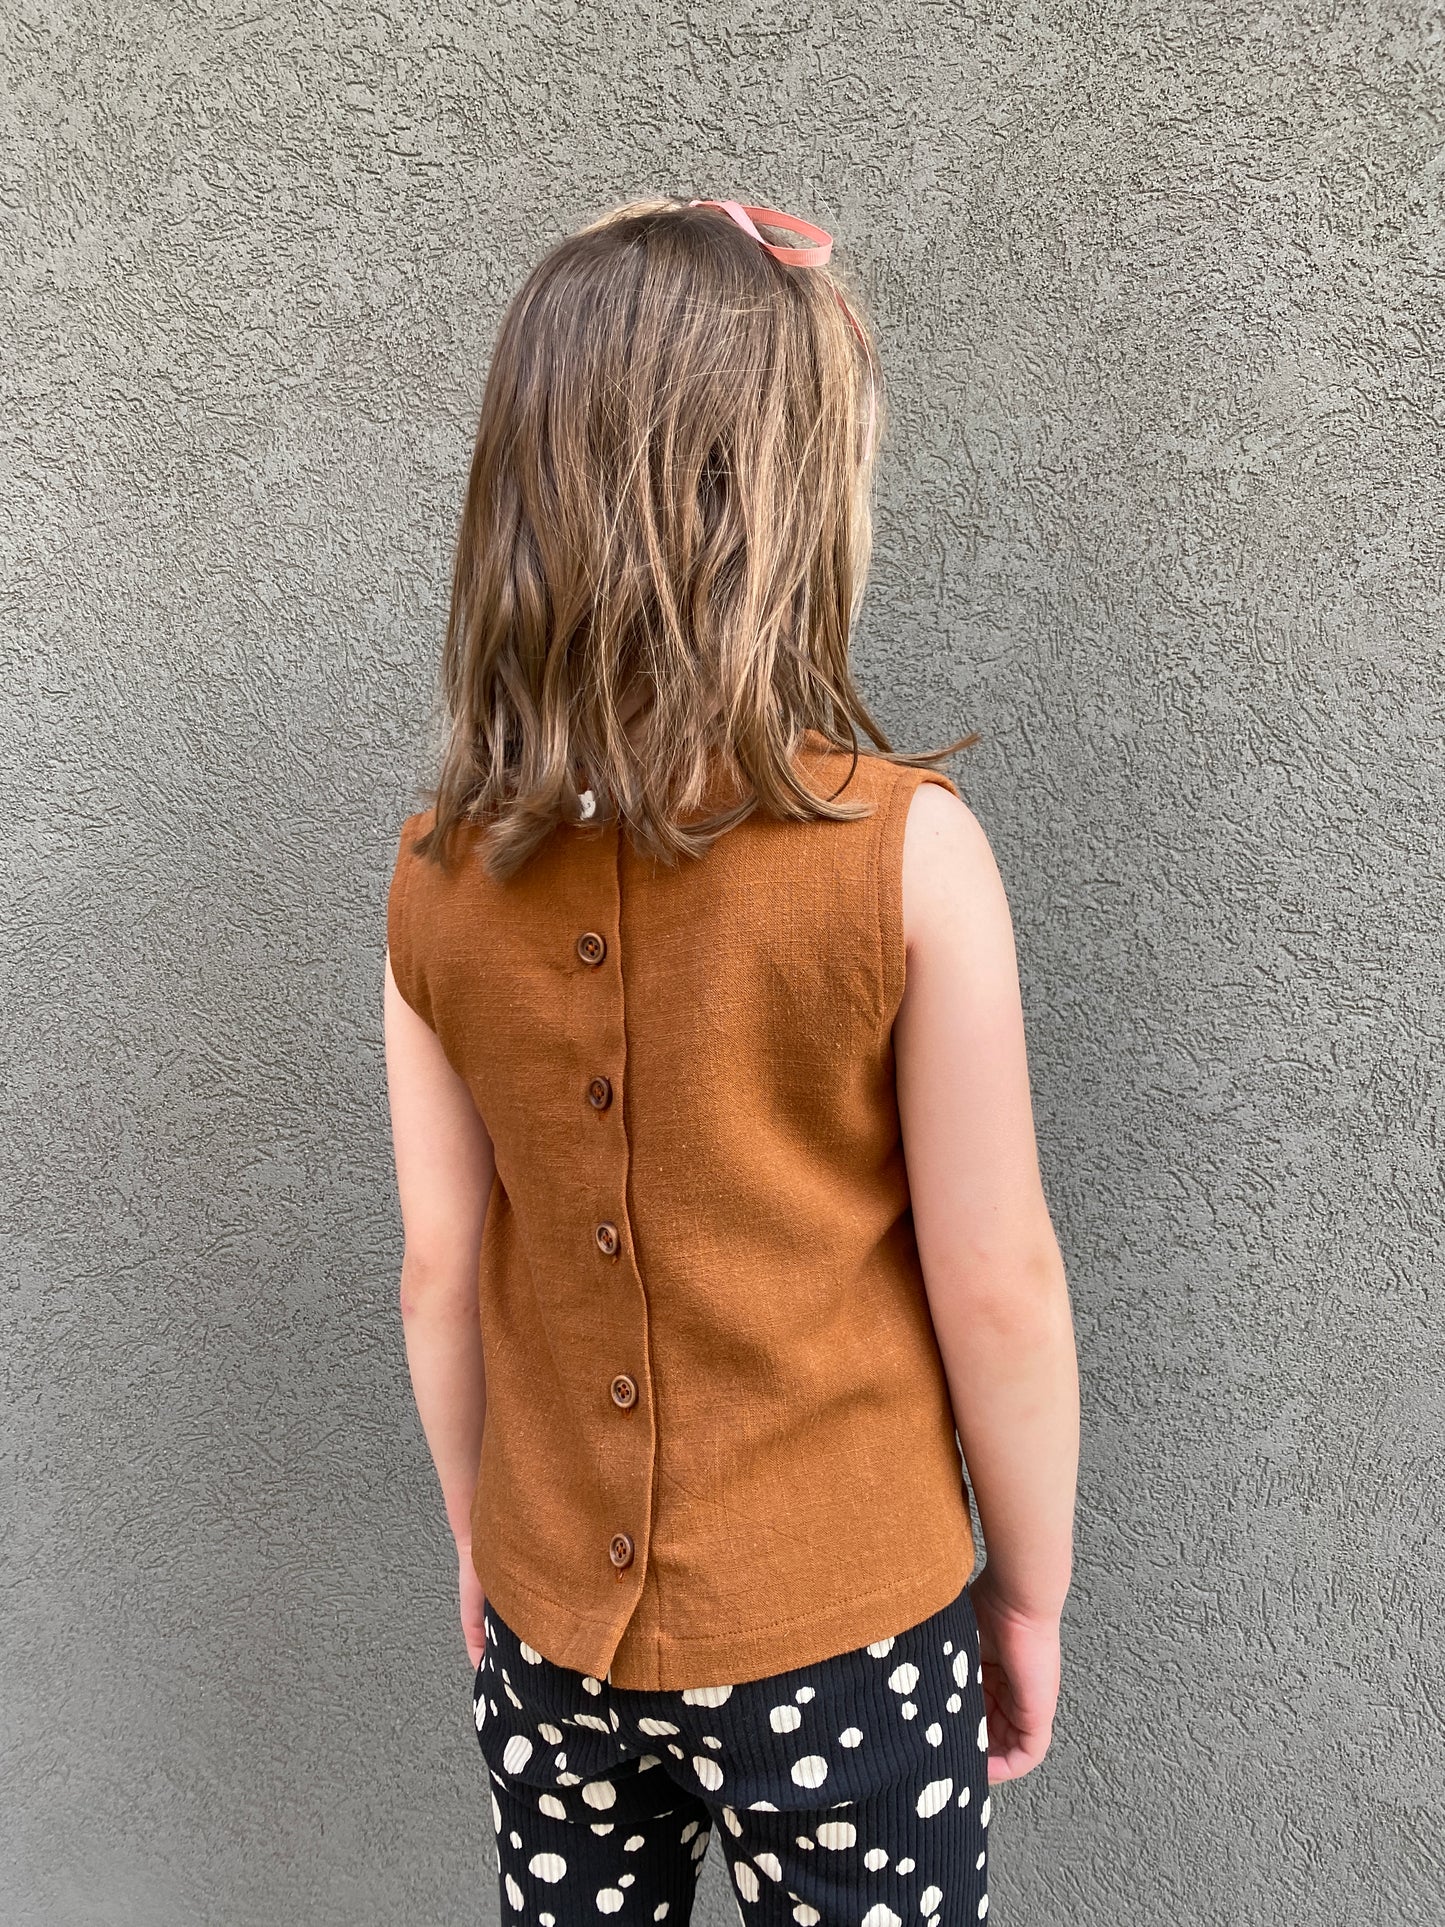 Button-Back Top Pattern